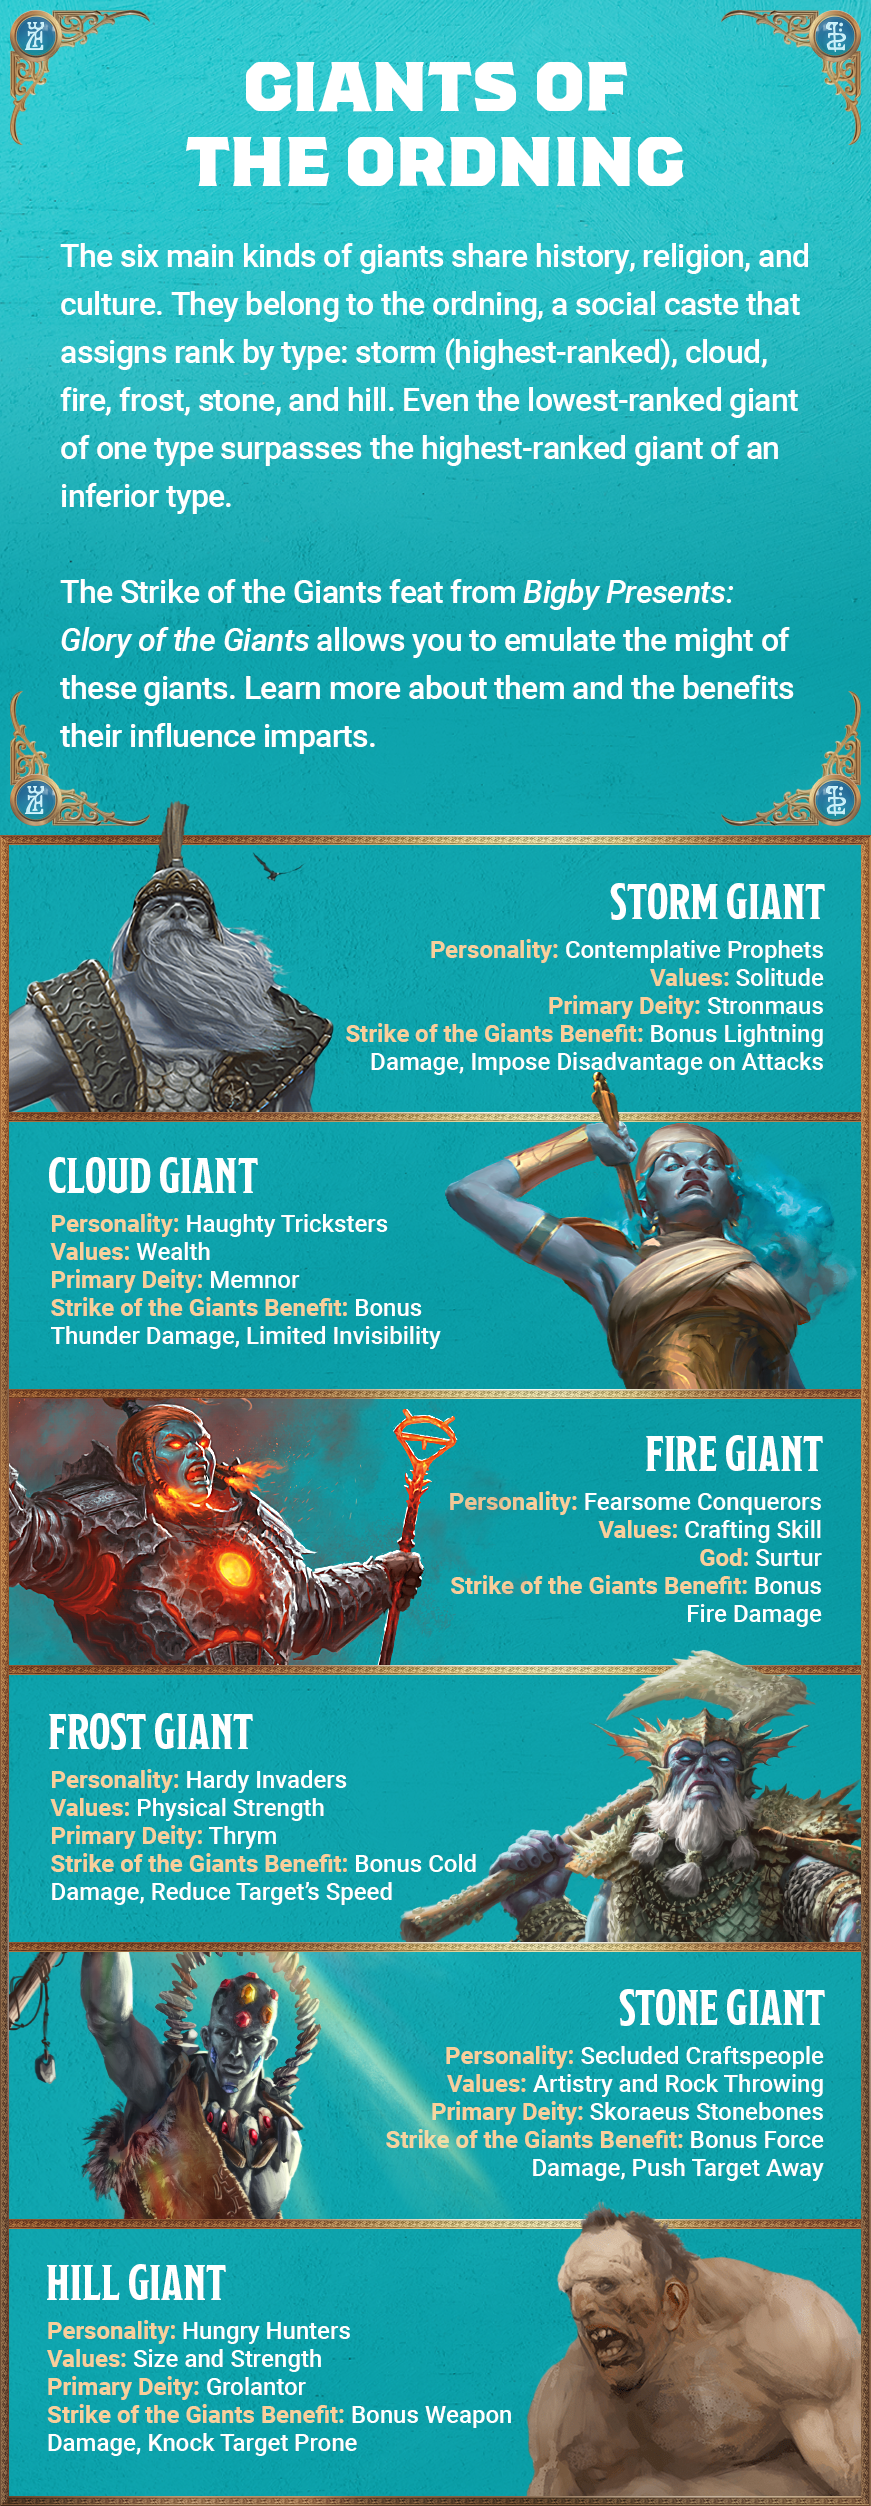 An infographic explaining the ordning and showing key traits of the six types of giants that comprise it: storm, cloud, fire, frost, stone, and hill giants.